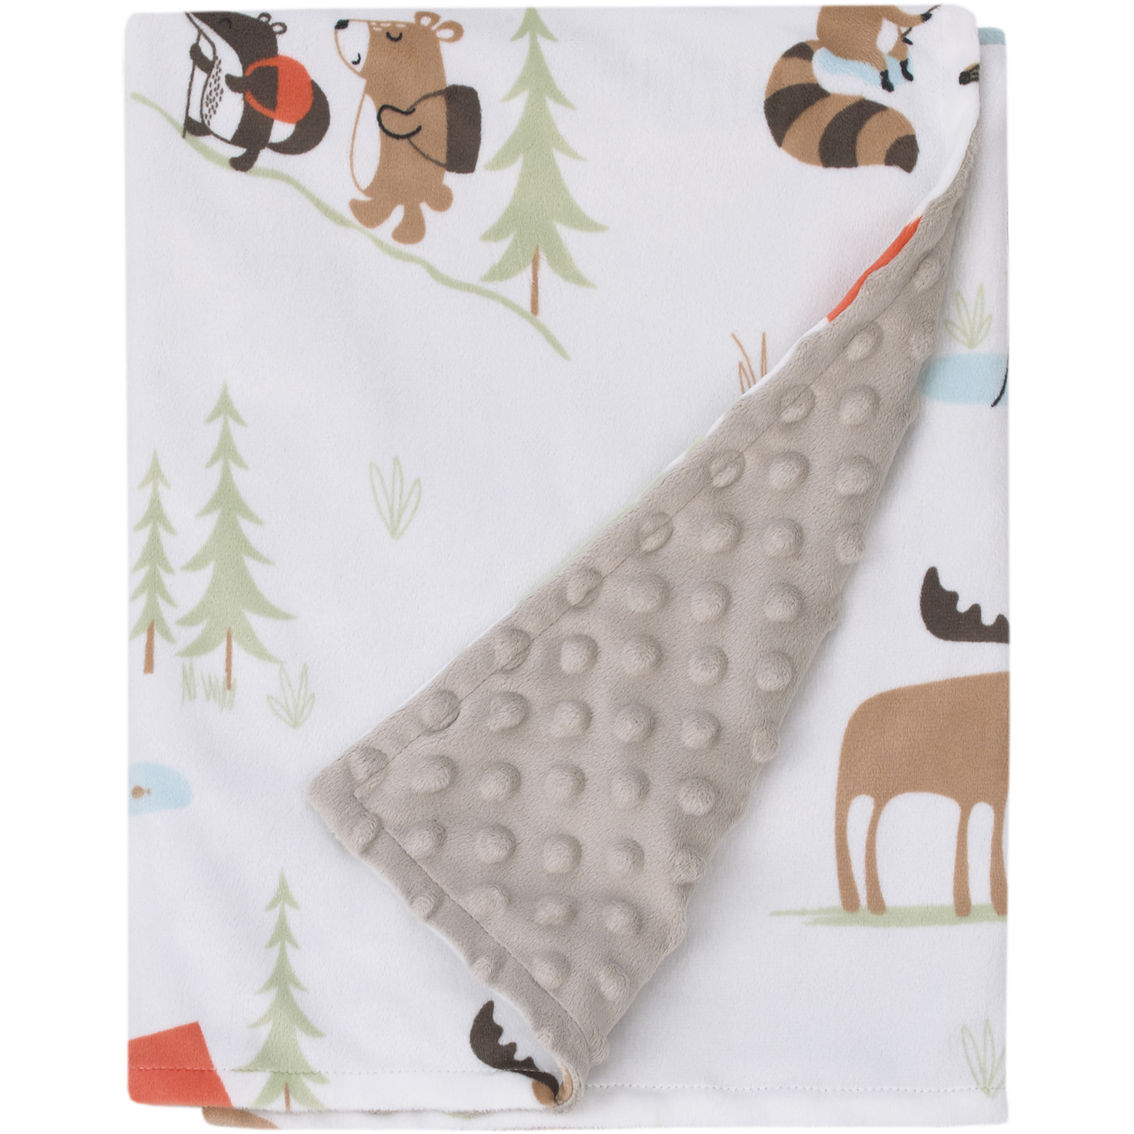 Little Bedding by NoJo Camping Plush Blanket - Image 2 of 4